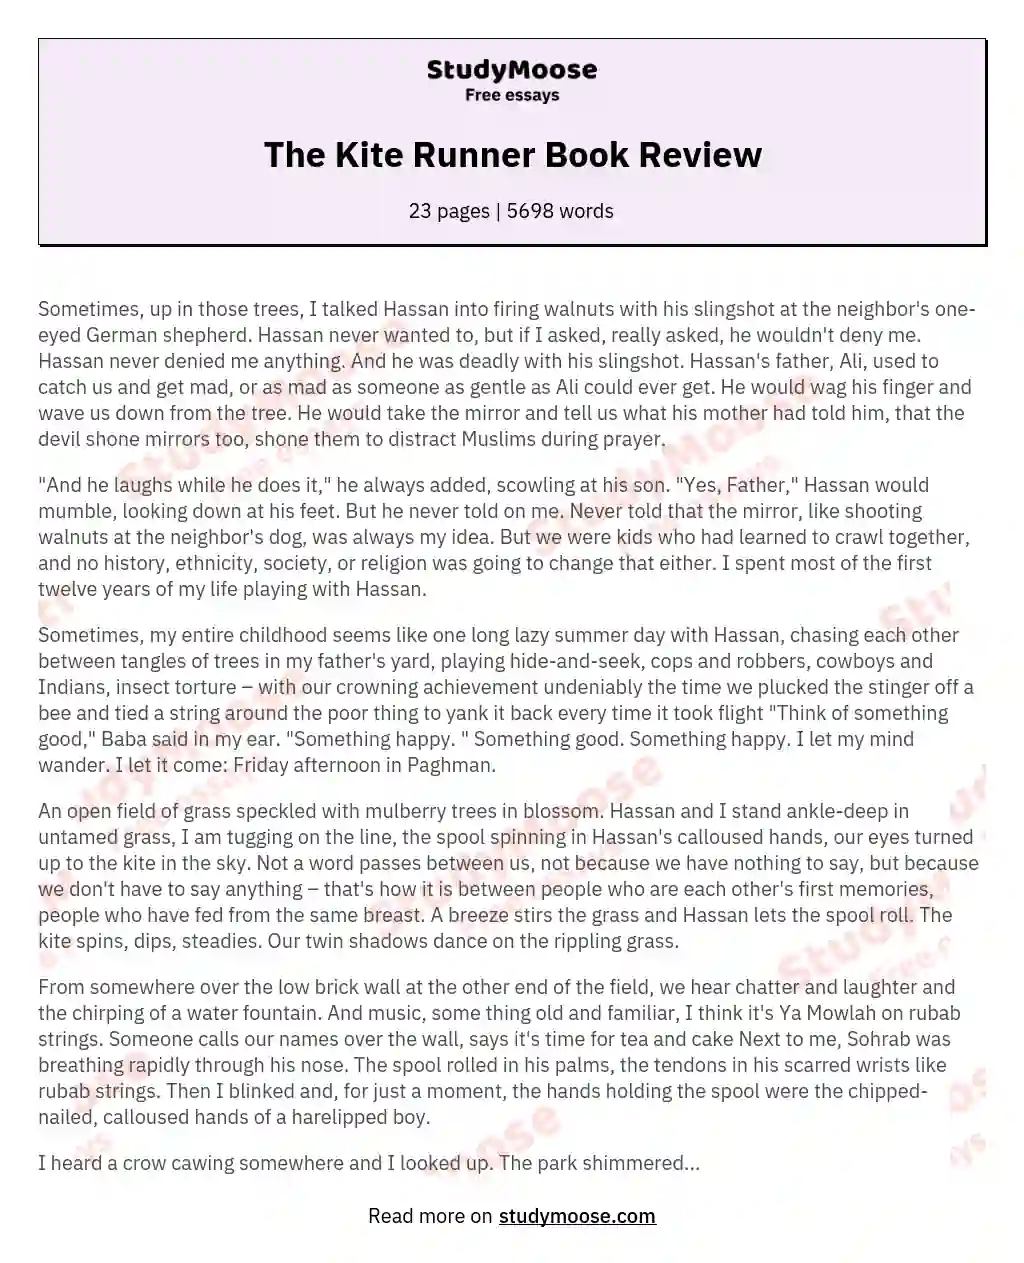 thesis statements the kite runner